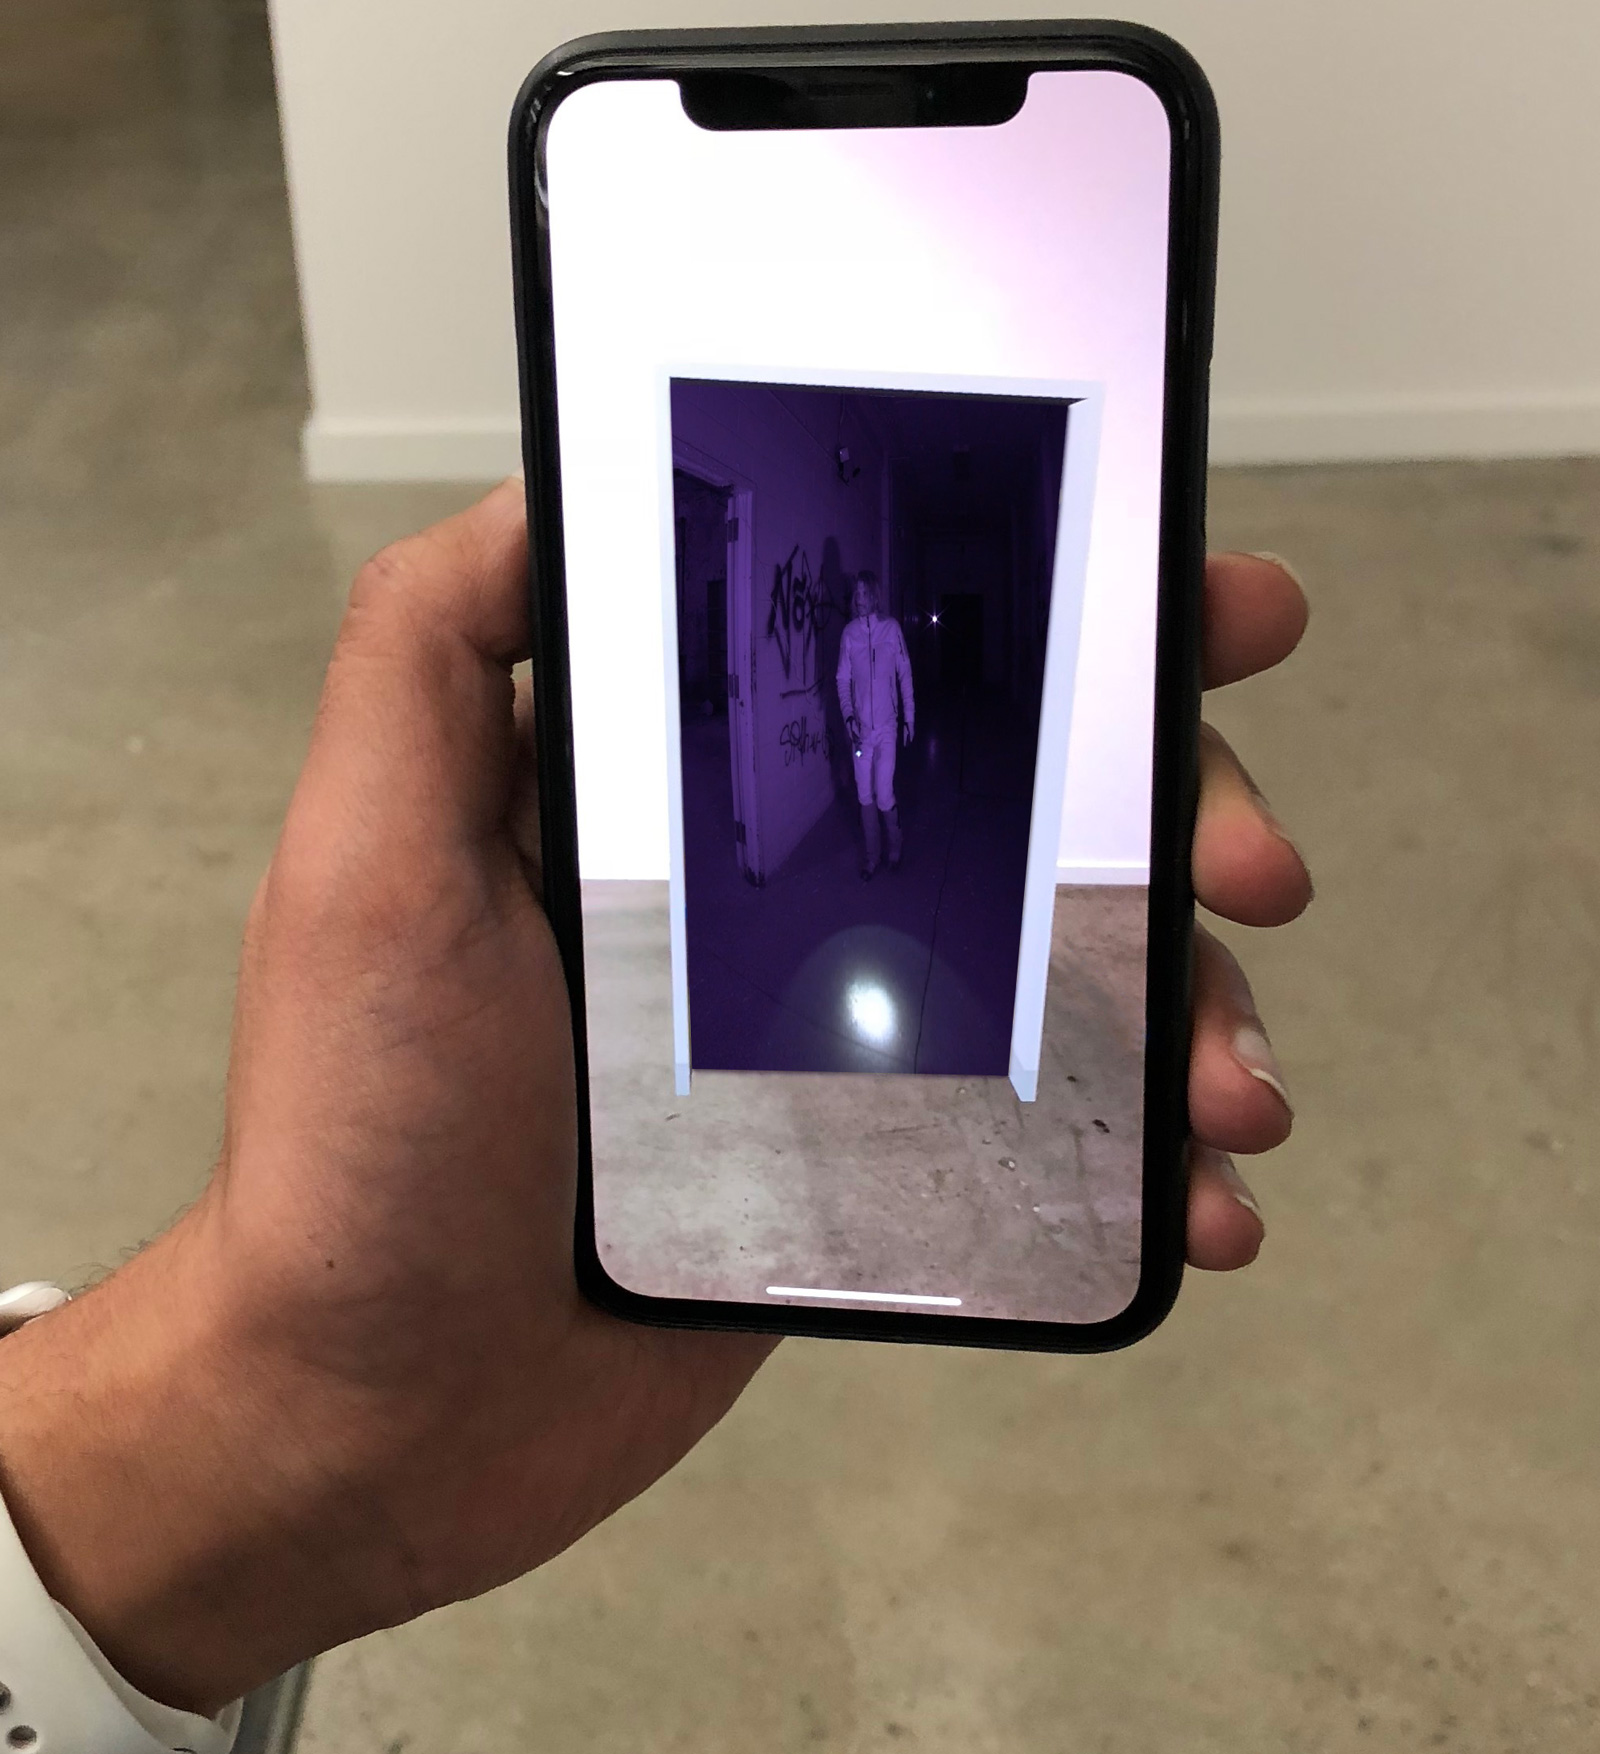 NextVR's augmented reality